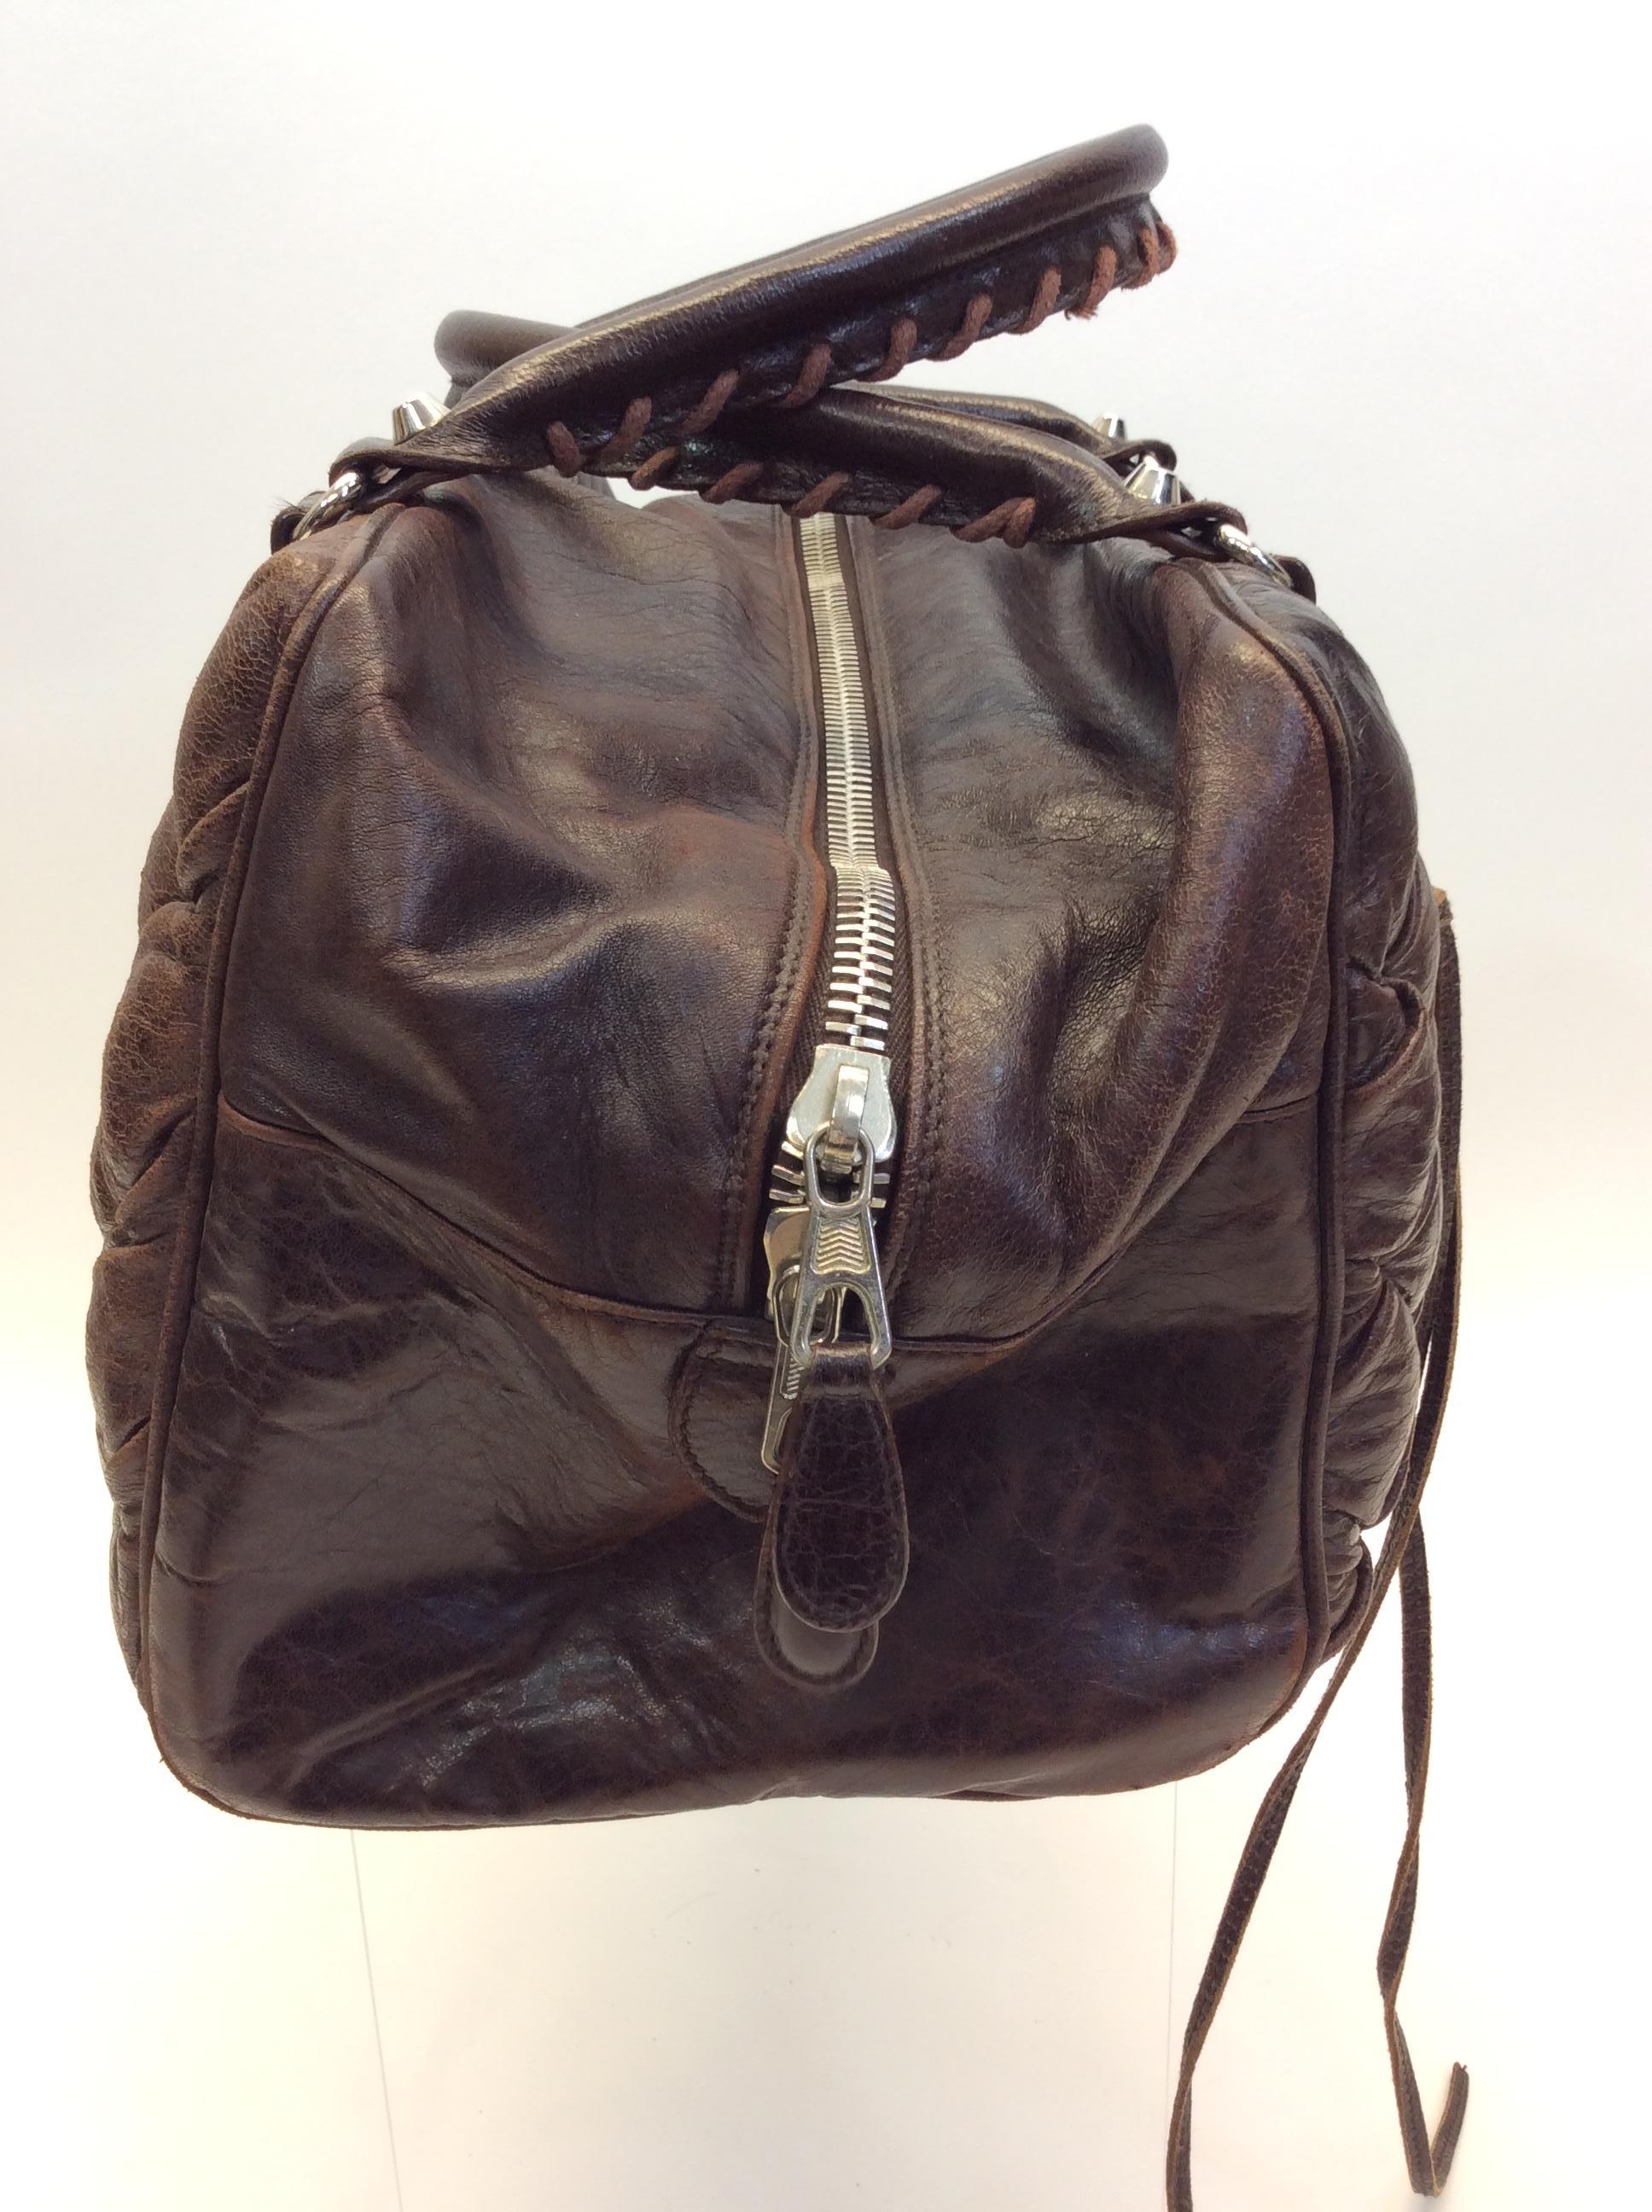 Balenciaga Brown Quilted Leather Handbag In Fair Condition For Sale In Narberth, PA